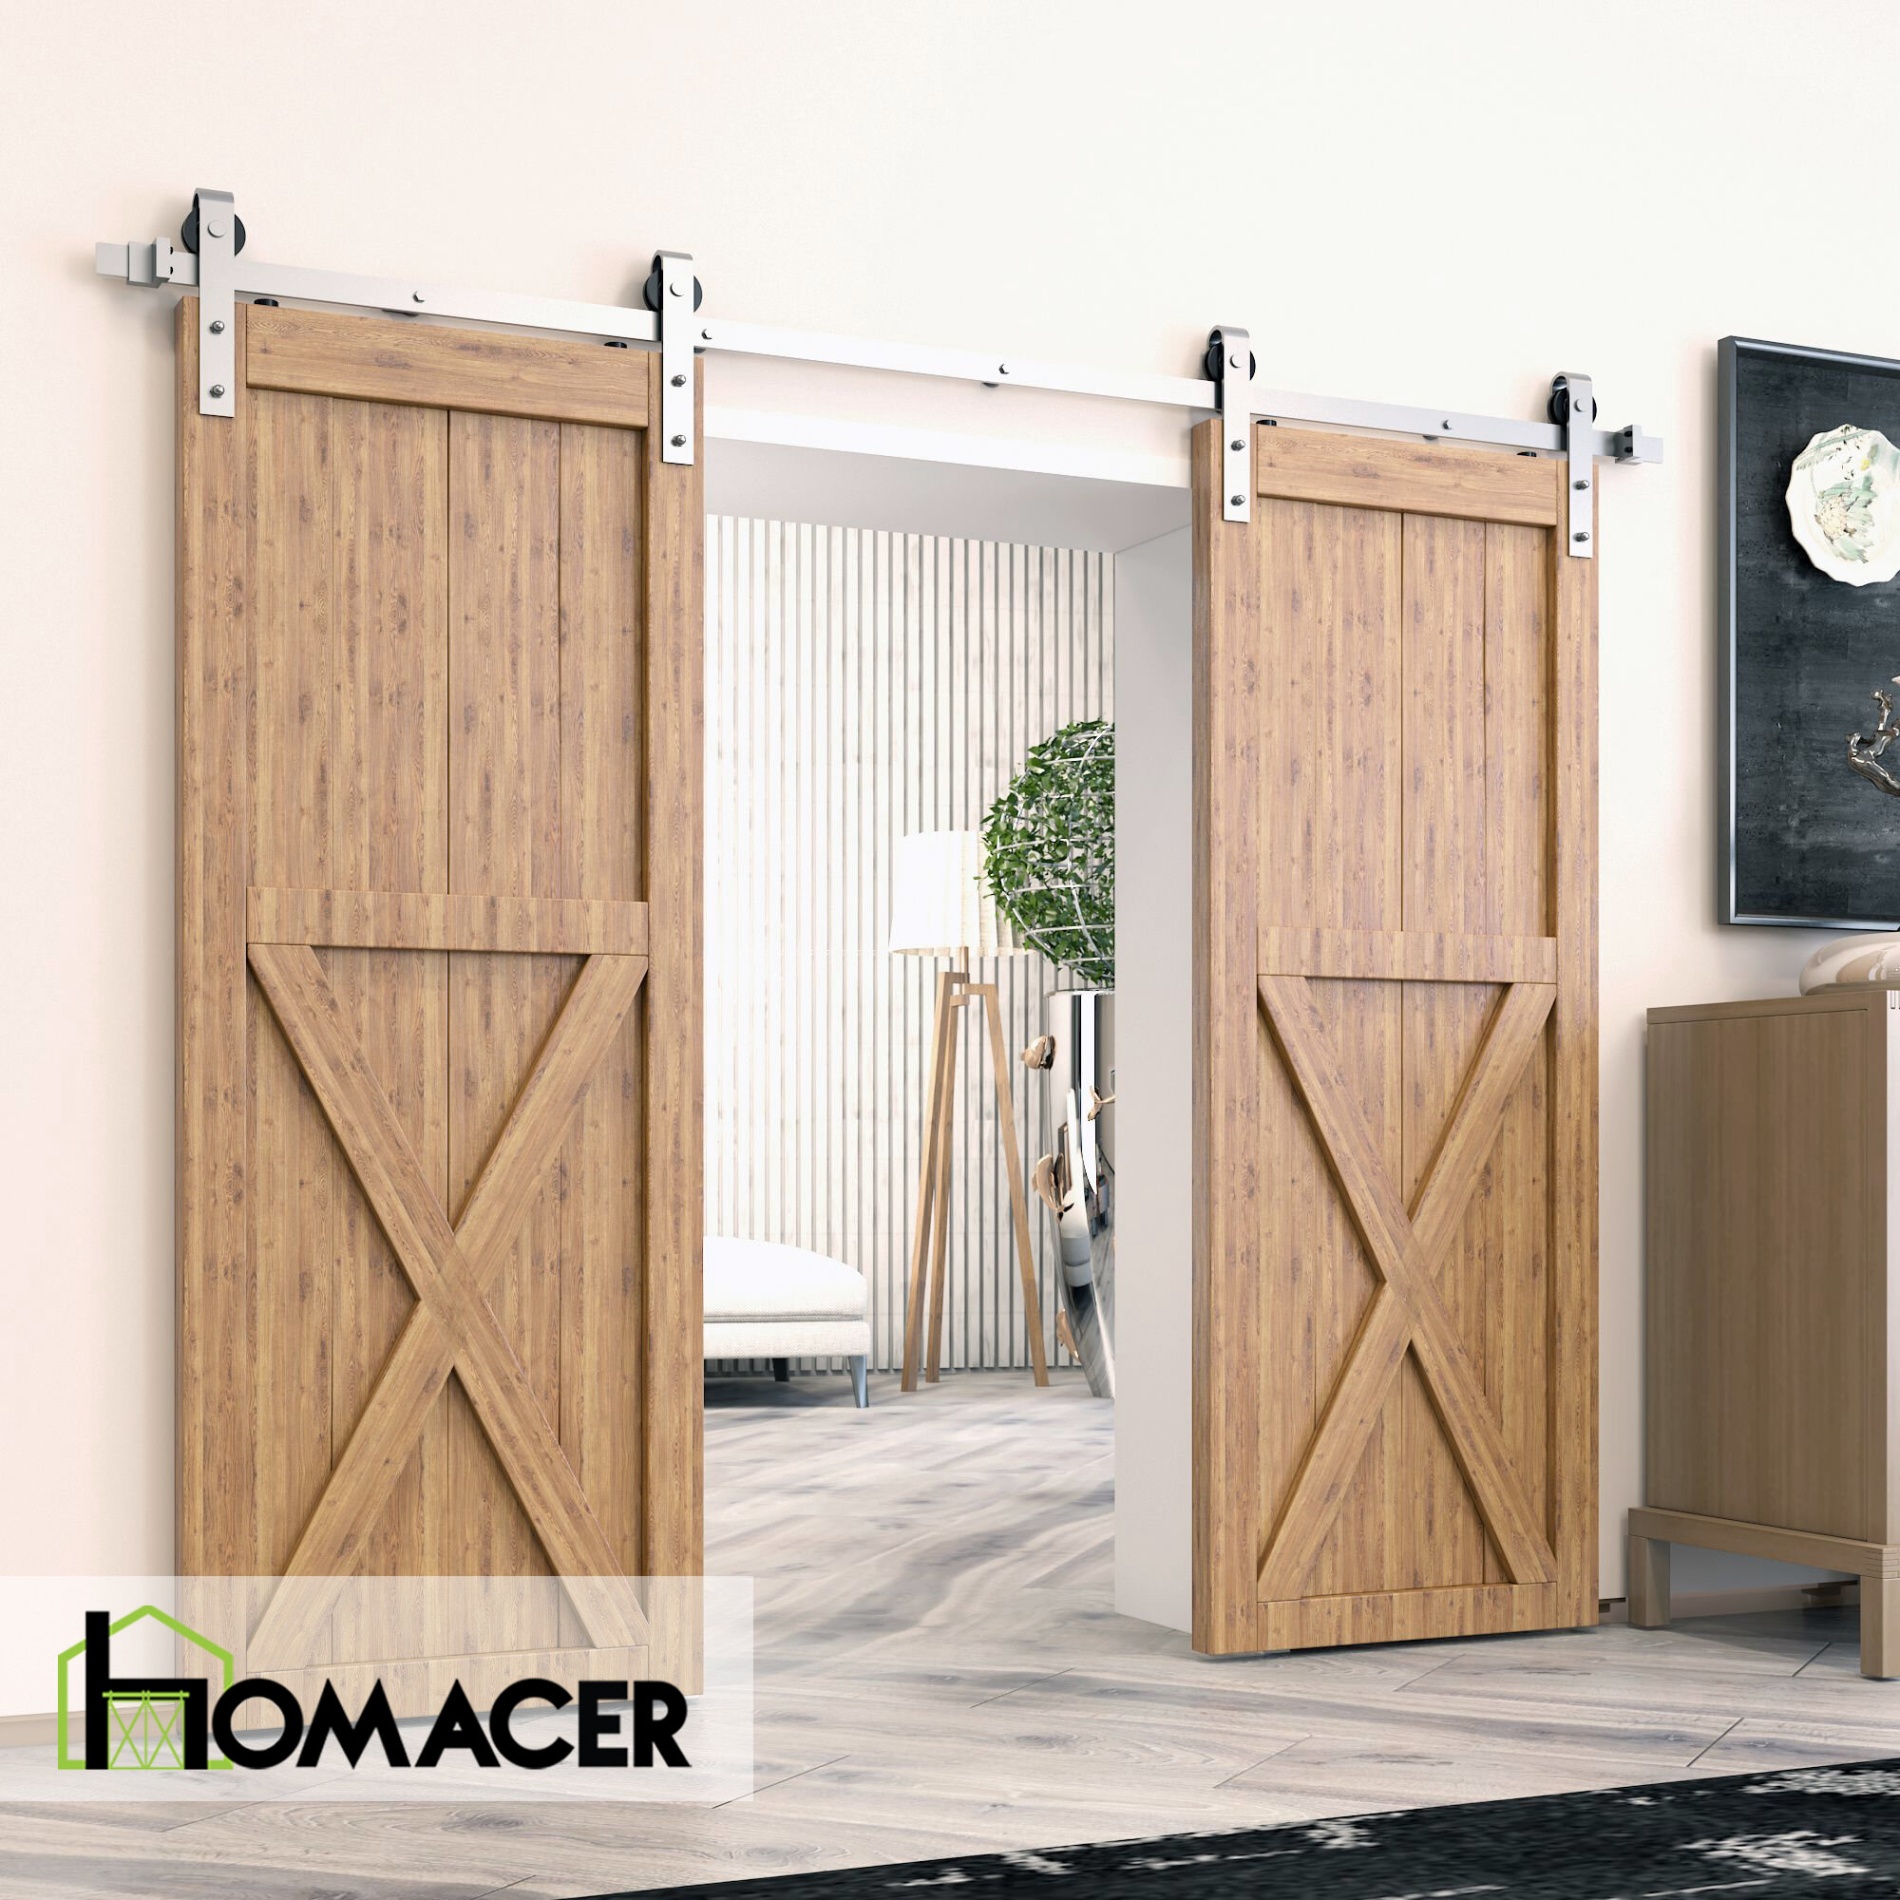 Upgrade Your Barn Door Style With Trendy Accessories For A Chic Look!